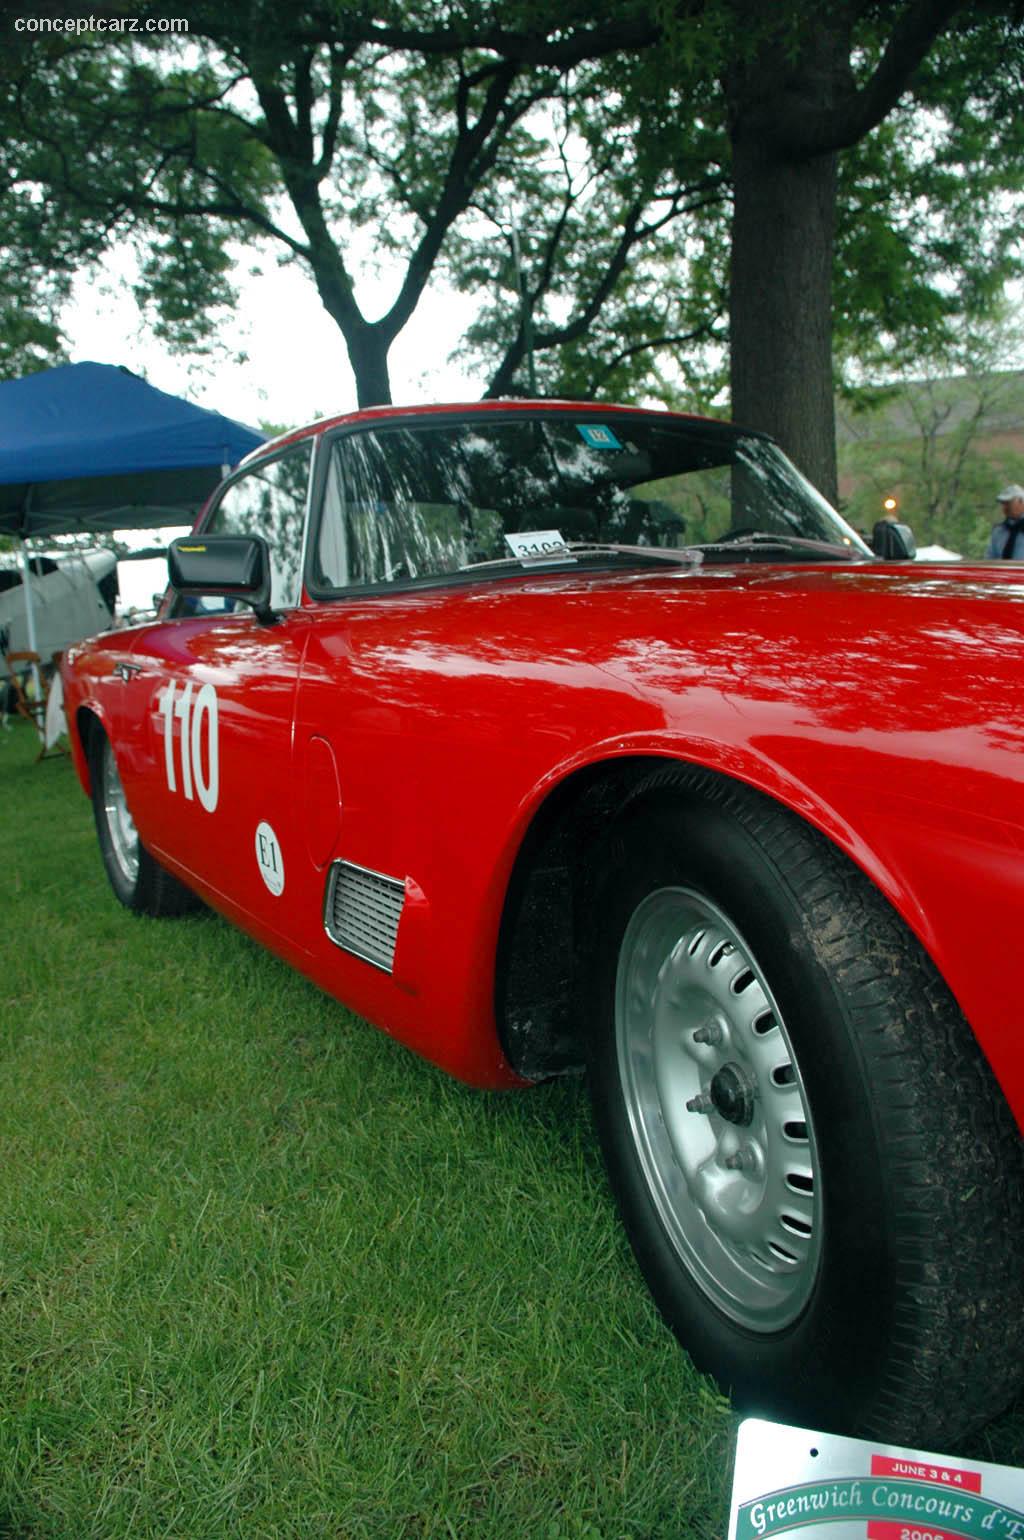 1958 Maserati 3500 GT at the Greenwich Concours d' Elegance